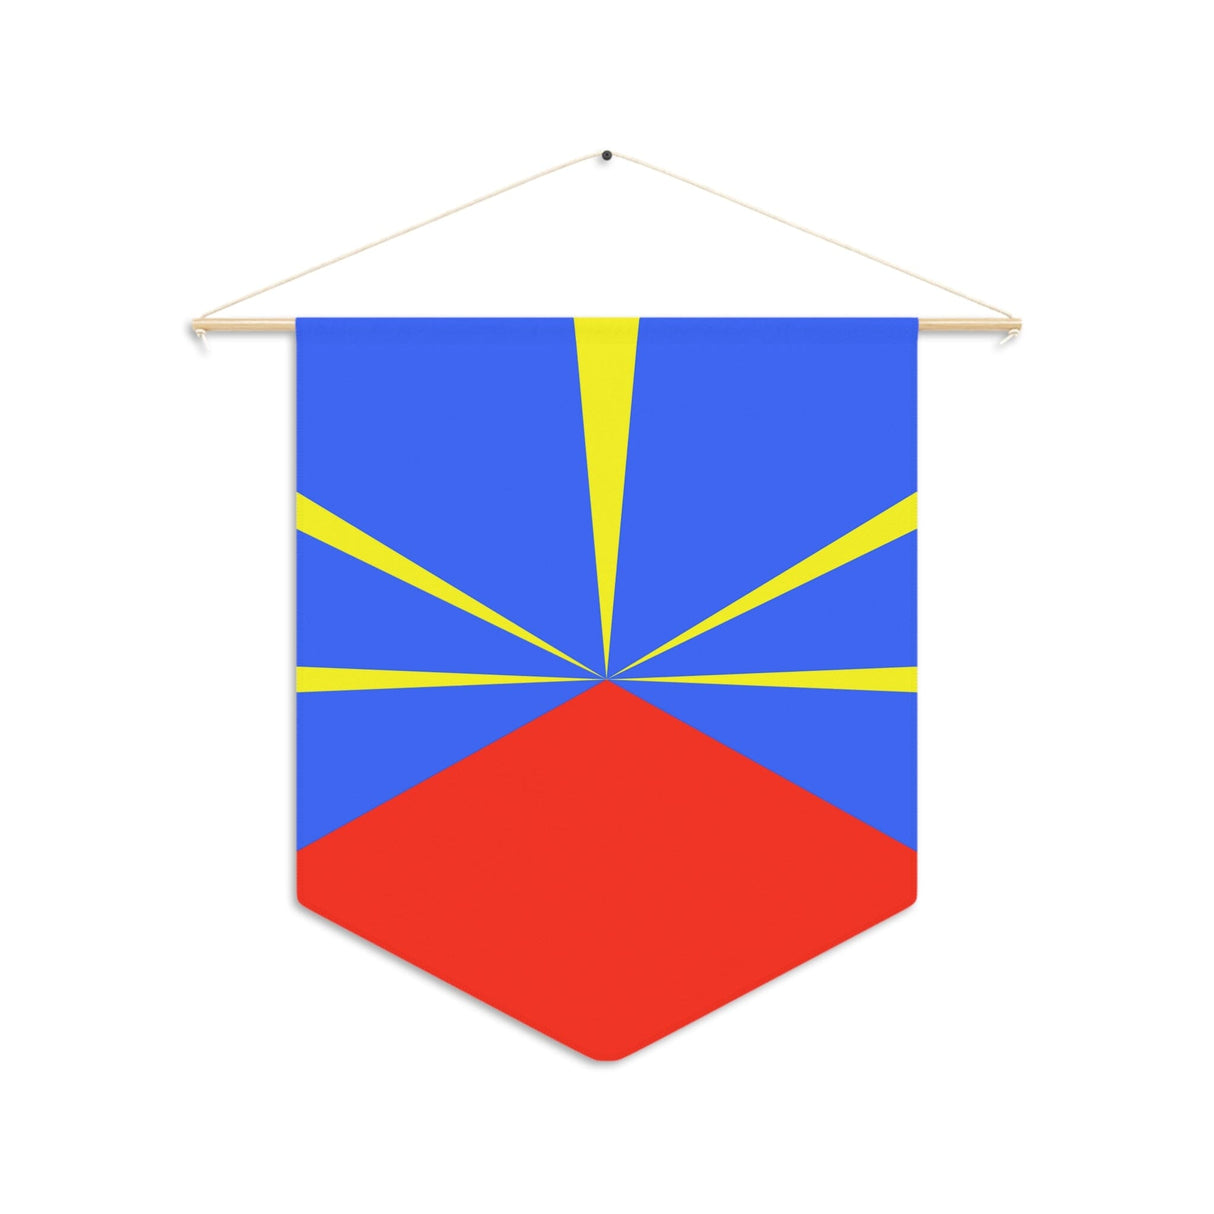 Reunion Island flag pennant to hang in polyester - Pixelforma